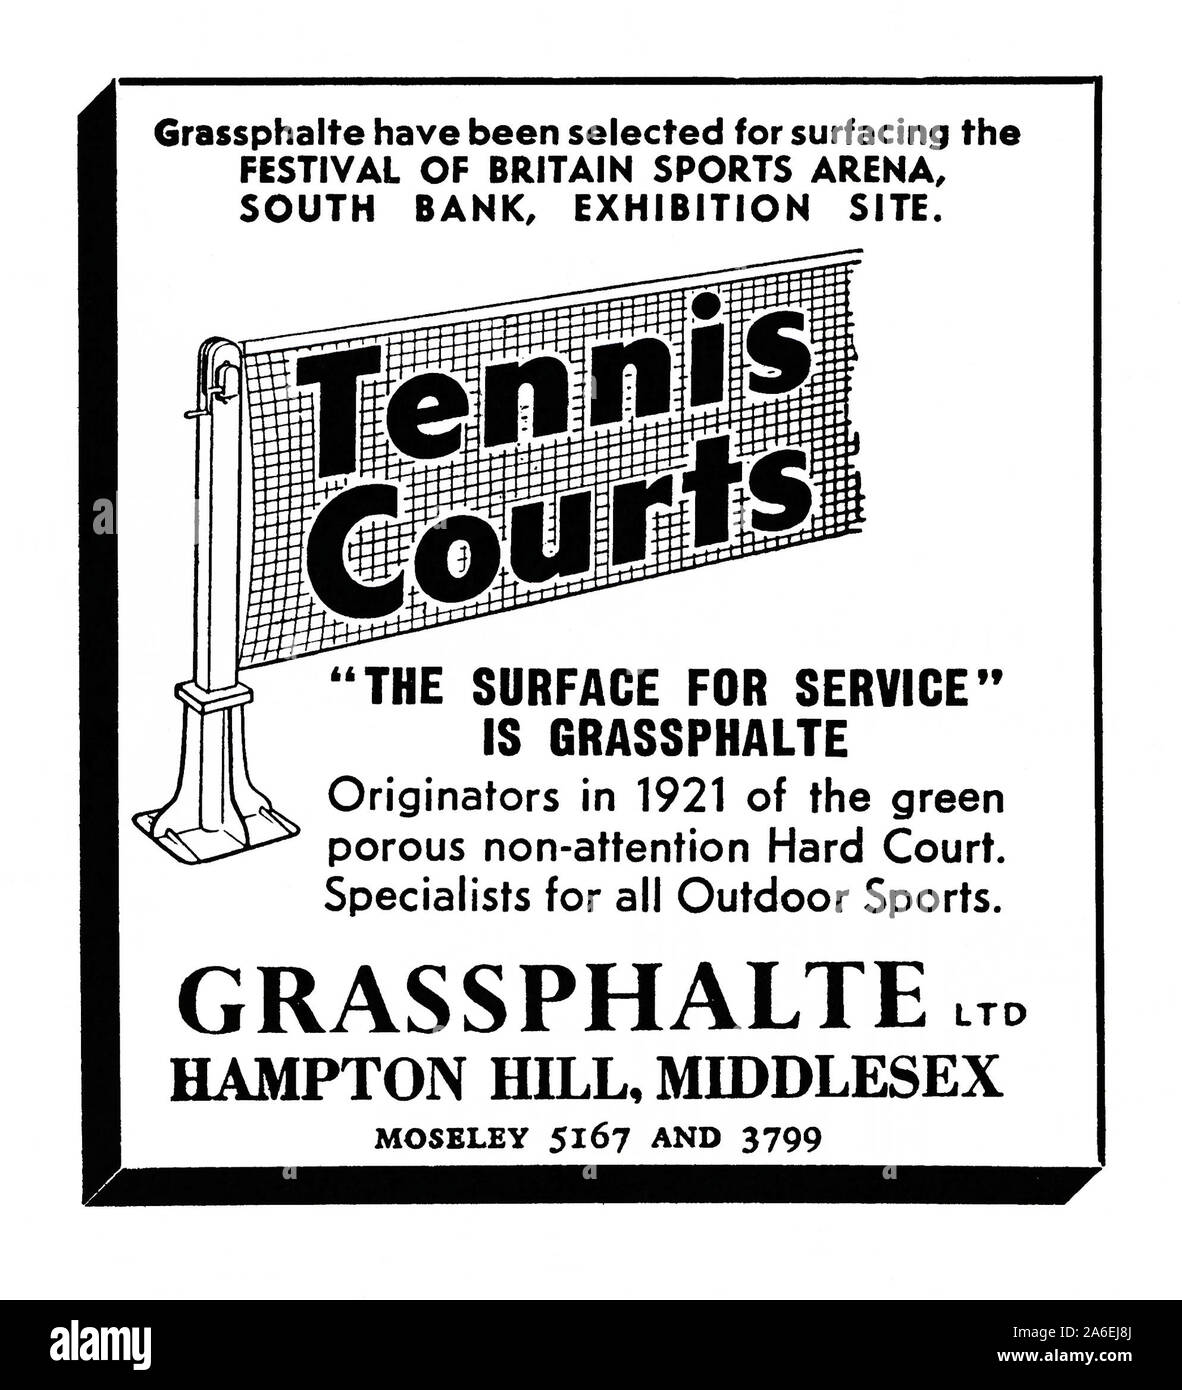 Advert for Grassphalte tennis court surfacing, 1951. Grassphalte Ltd of Hampton Hill, Middlesex, England, UK were suppliers of a porous open graded macadam or asphalt. The surface is designed for use in sports courts to ensure good surface drainage. As noted in the advert, the surface was used at the South Bank site of the Festival of Britain. Stock Photo